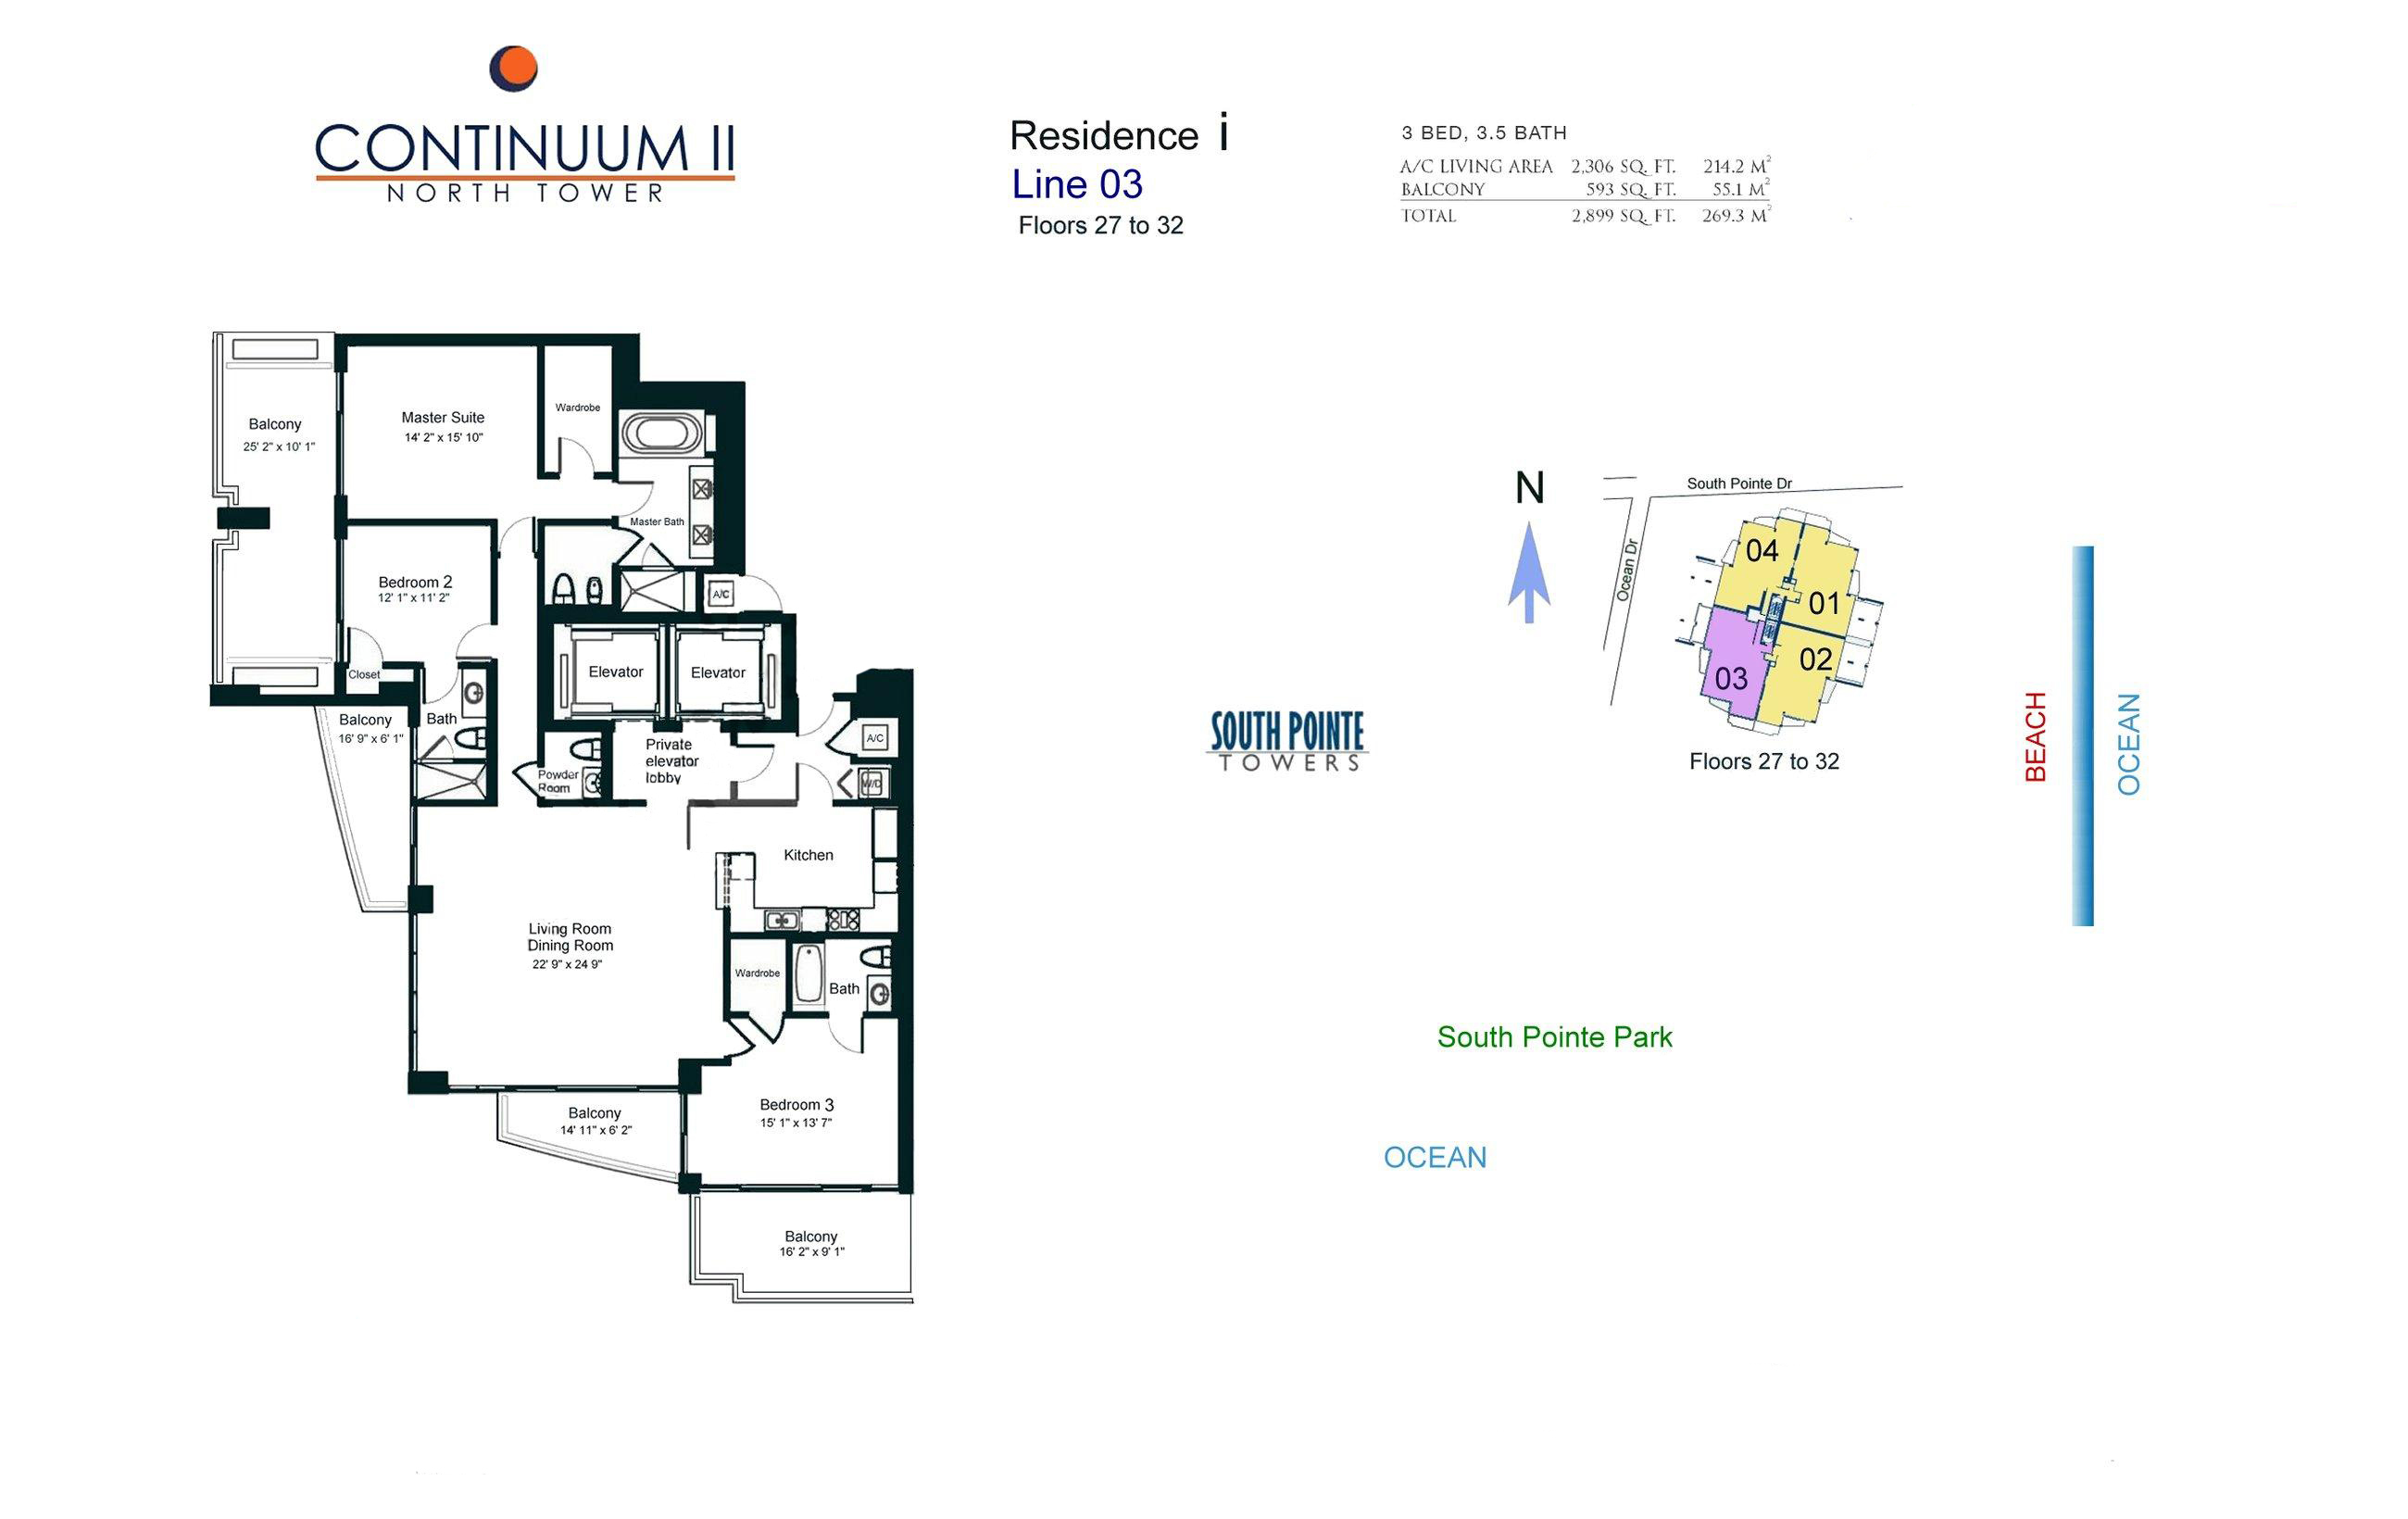 Continuum North Tower Residence I Line 03